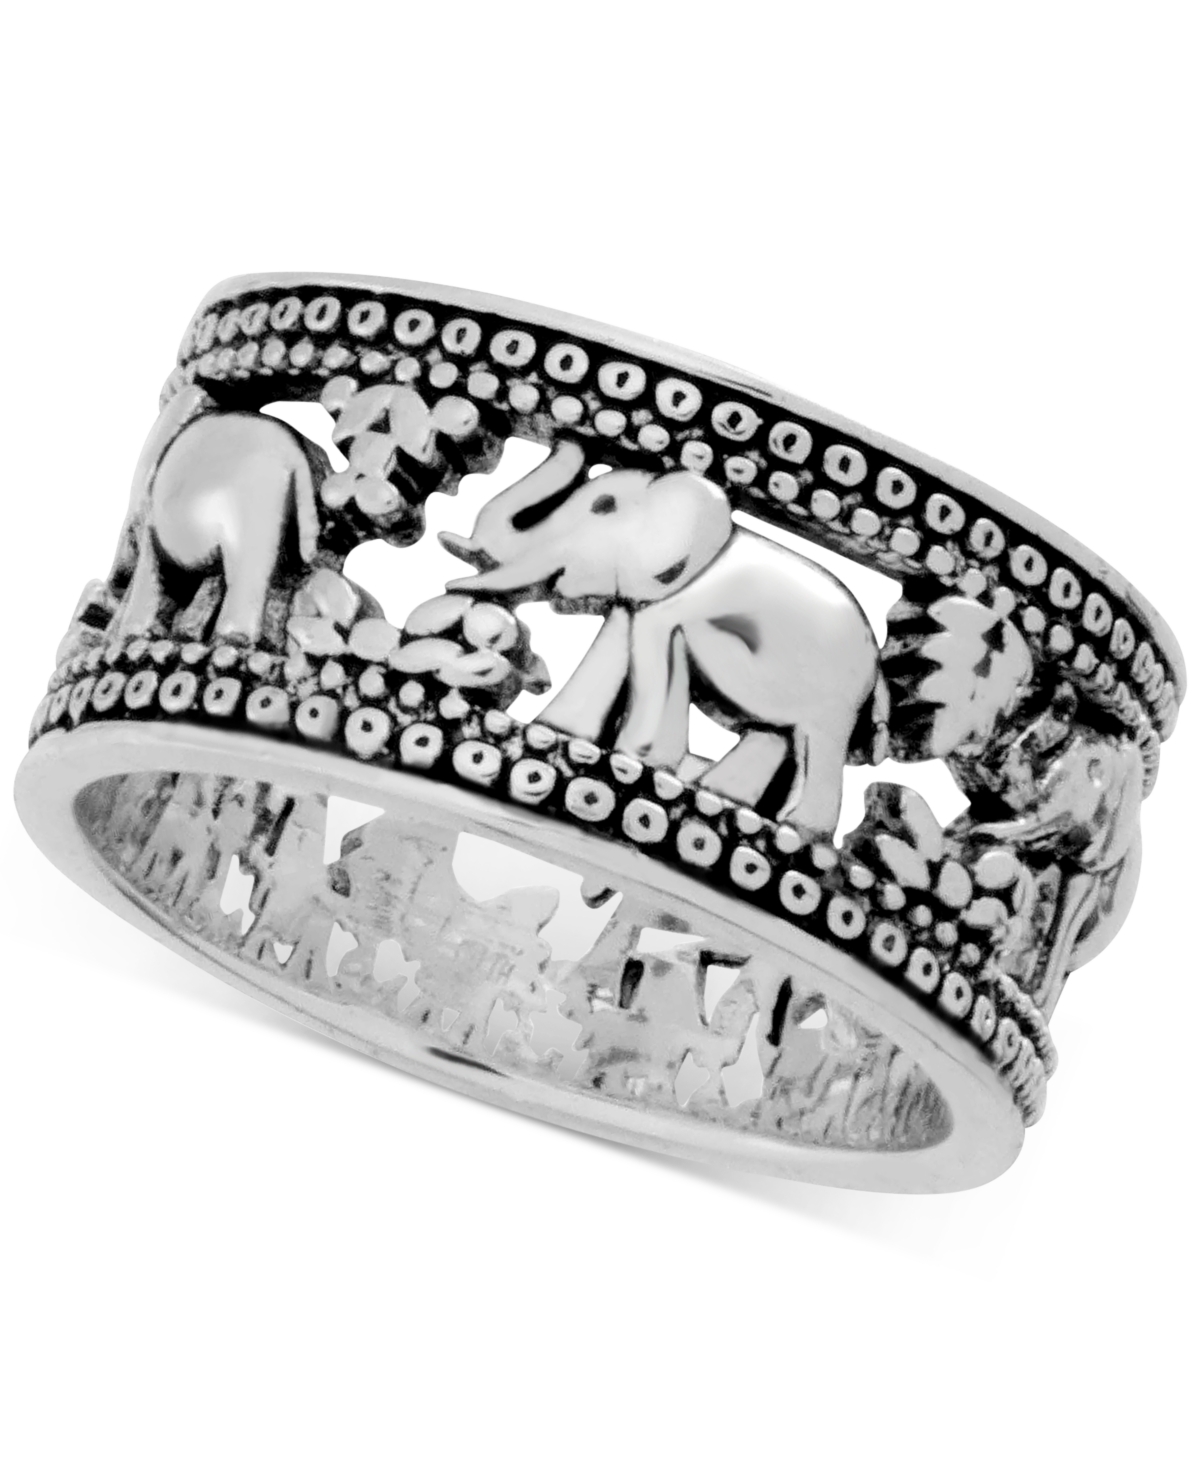 And Now This Elephant Band Ring in Silver-Plate - Base Metal